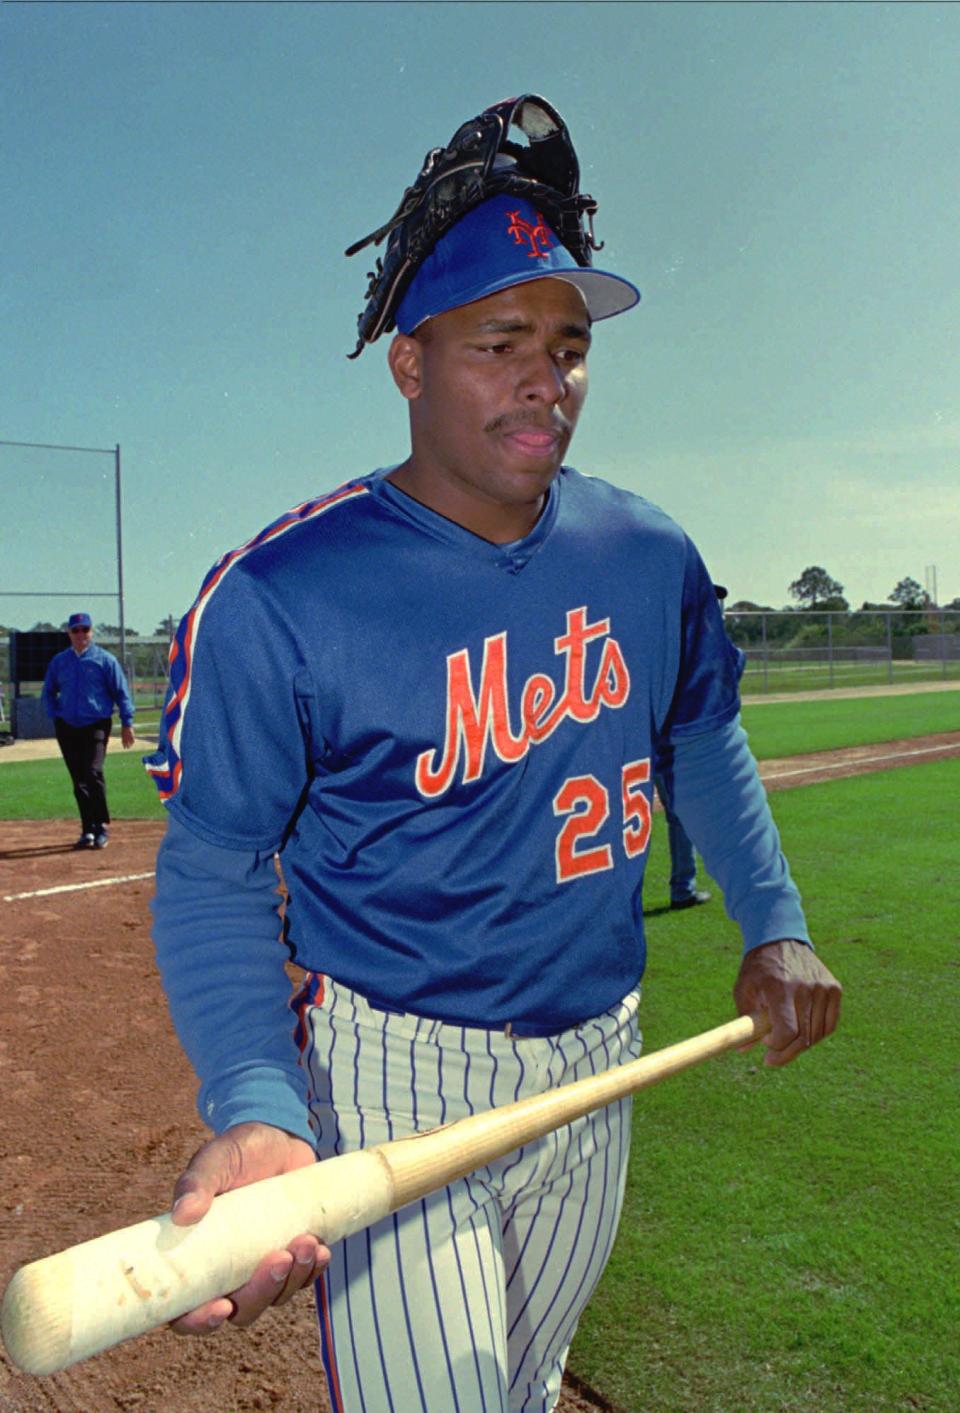 New York Mets outfielder Bobby Bonilla wears a glove on his cap as he leaves the practice field on Feb. 25, 1993.